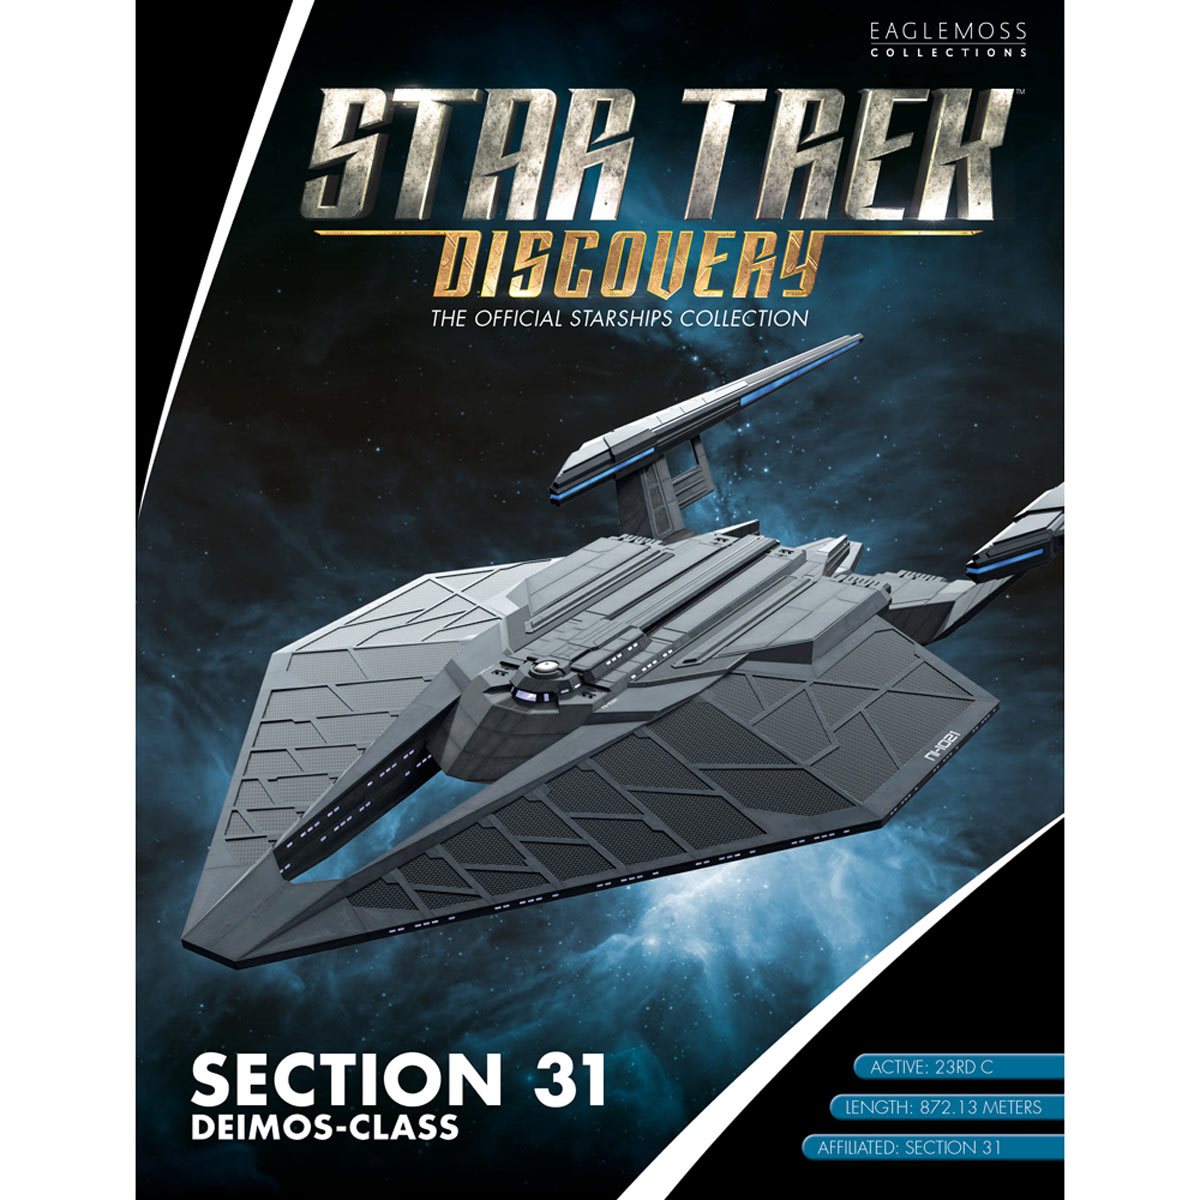 Star Trek Discovery Official Starships Collection Section 31 Station 